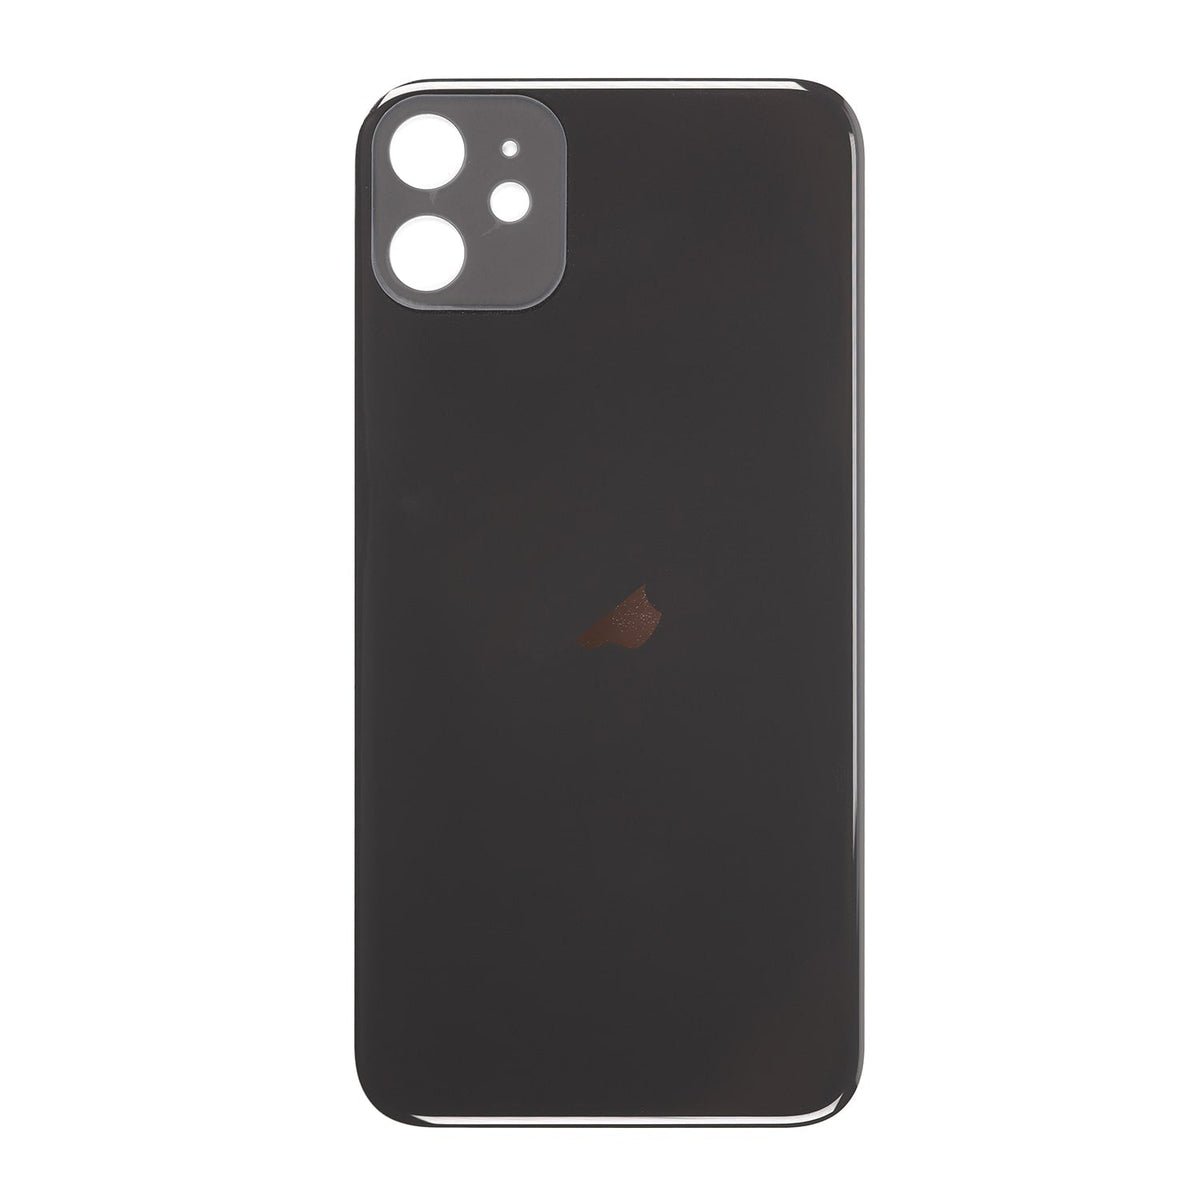 BLACK BACK COVER FOR IPHONE 11